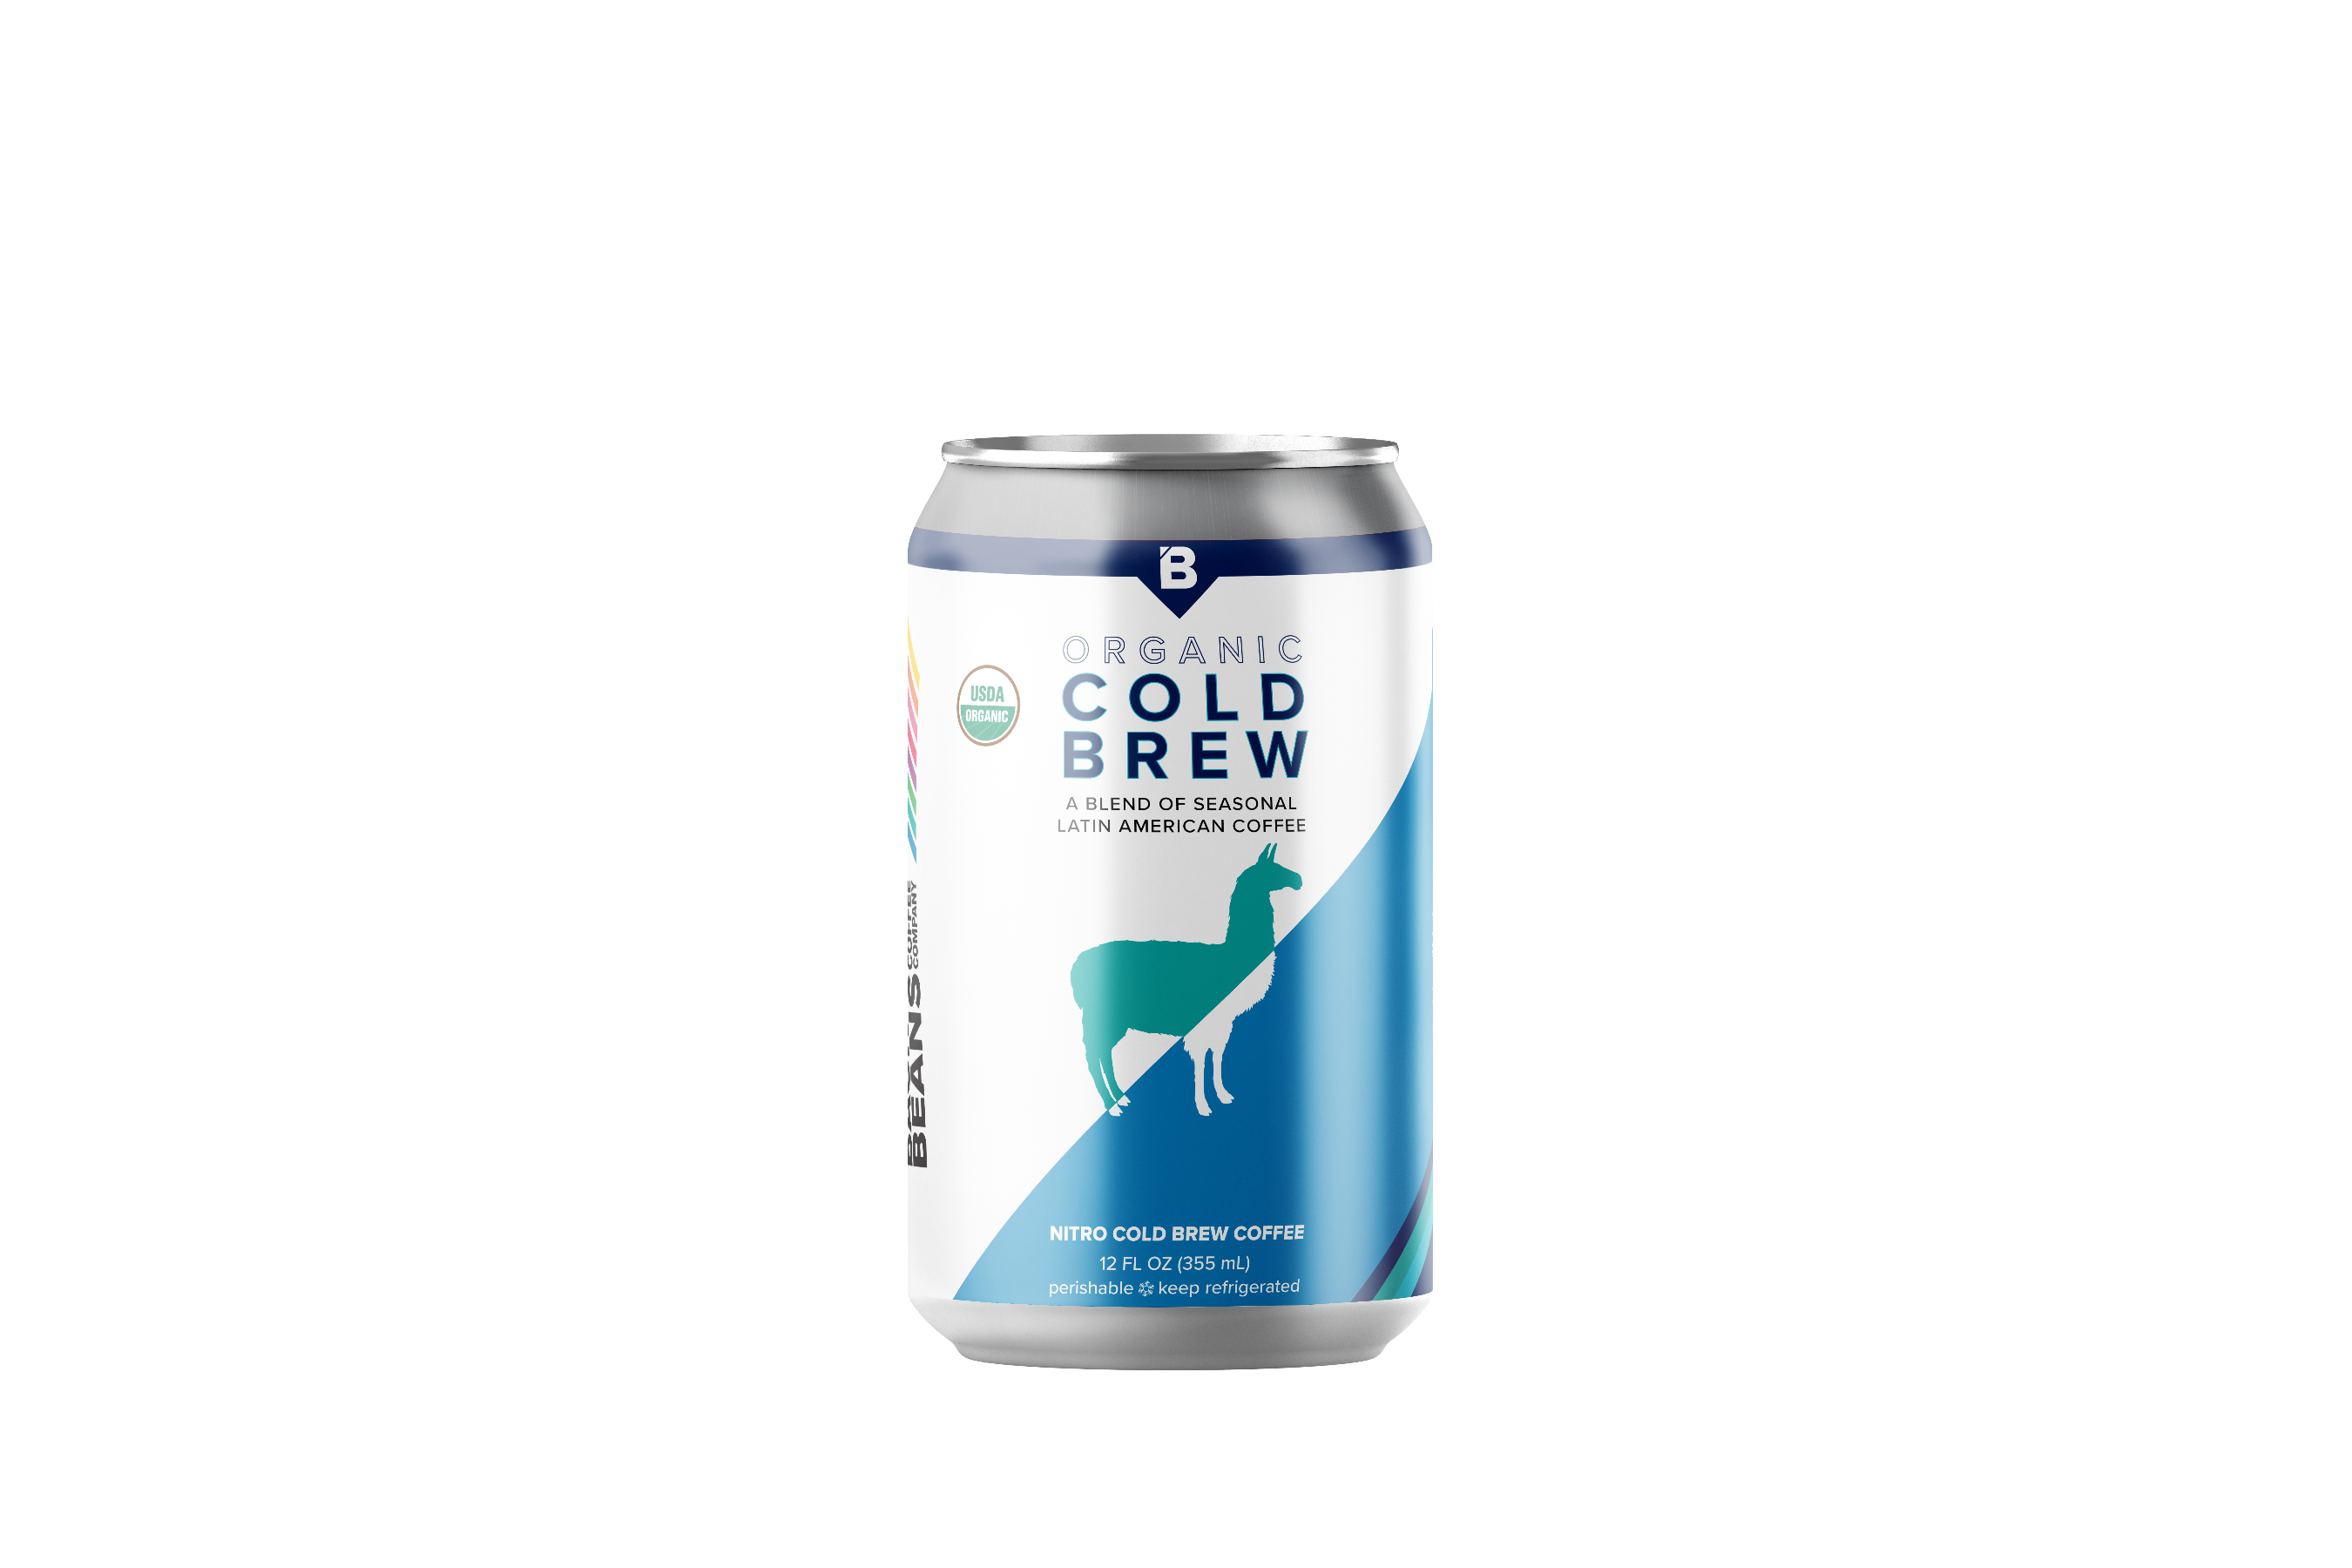 Image of Organic Cold Brew can.